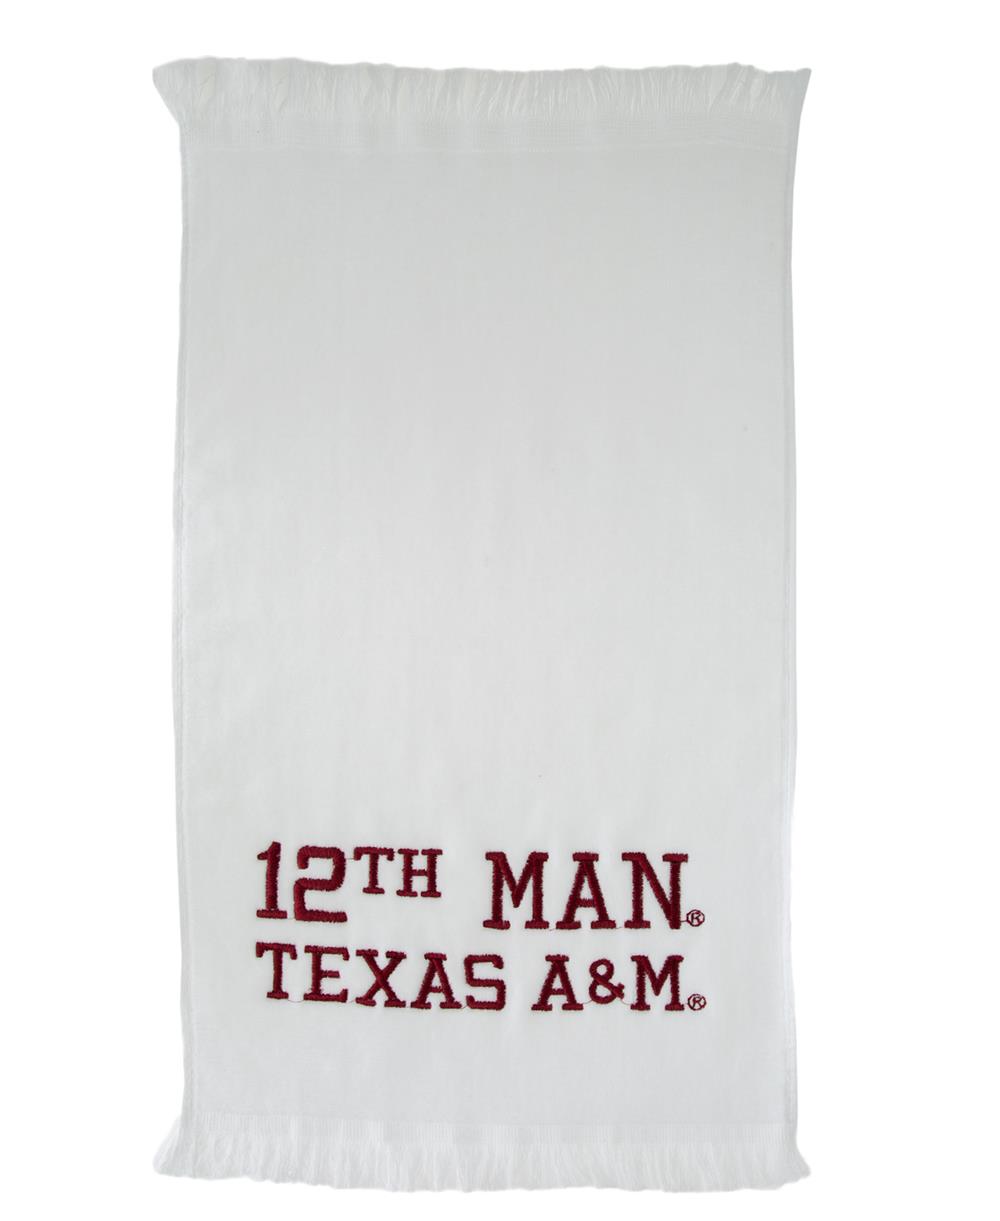 Linens Tea Towel Aggie Decor Kitchen Decor Embroidered  Kitchen Towel with Texas Map and T A&M